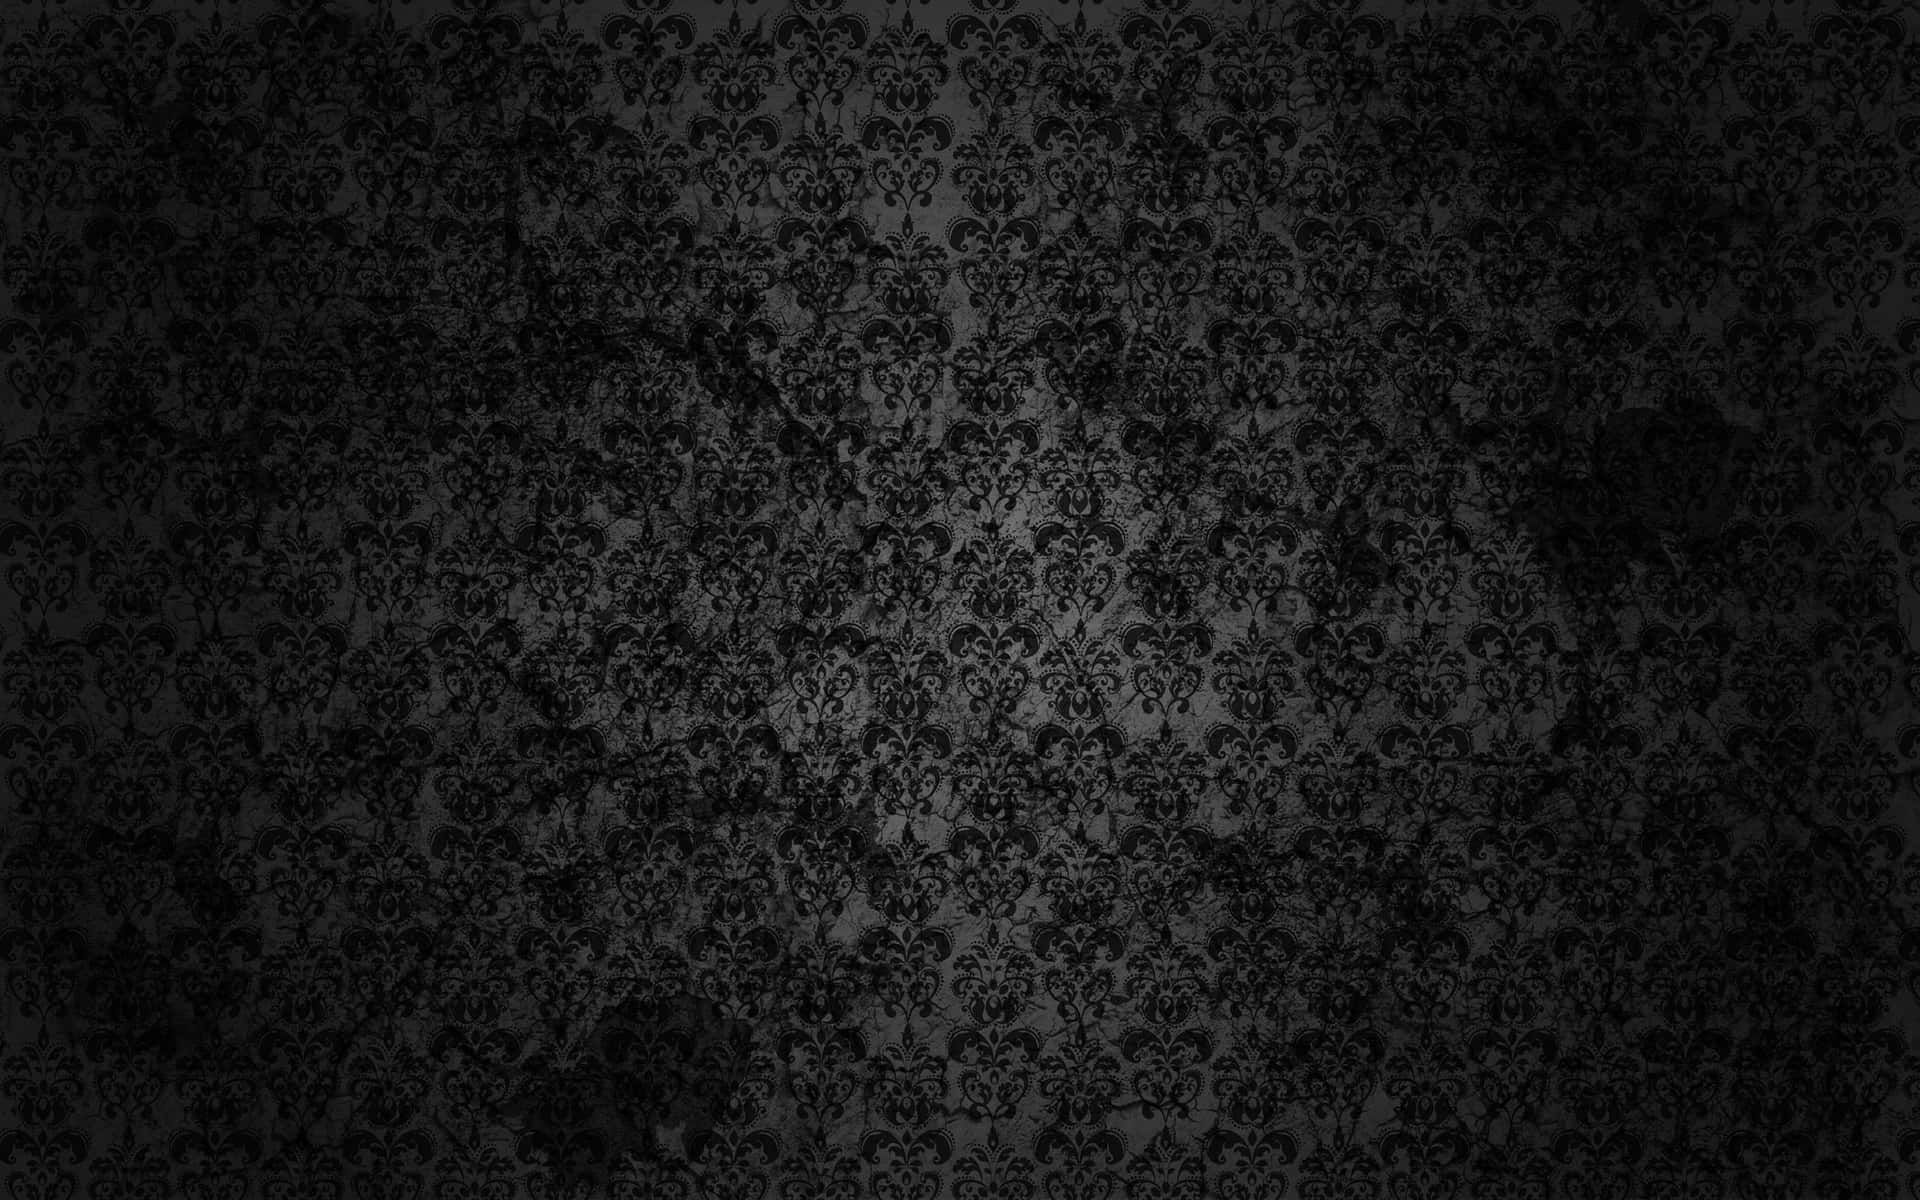 Download Sophisticated Matte Black and Gray Tiles Wallpaper